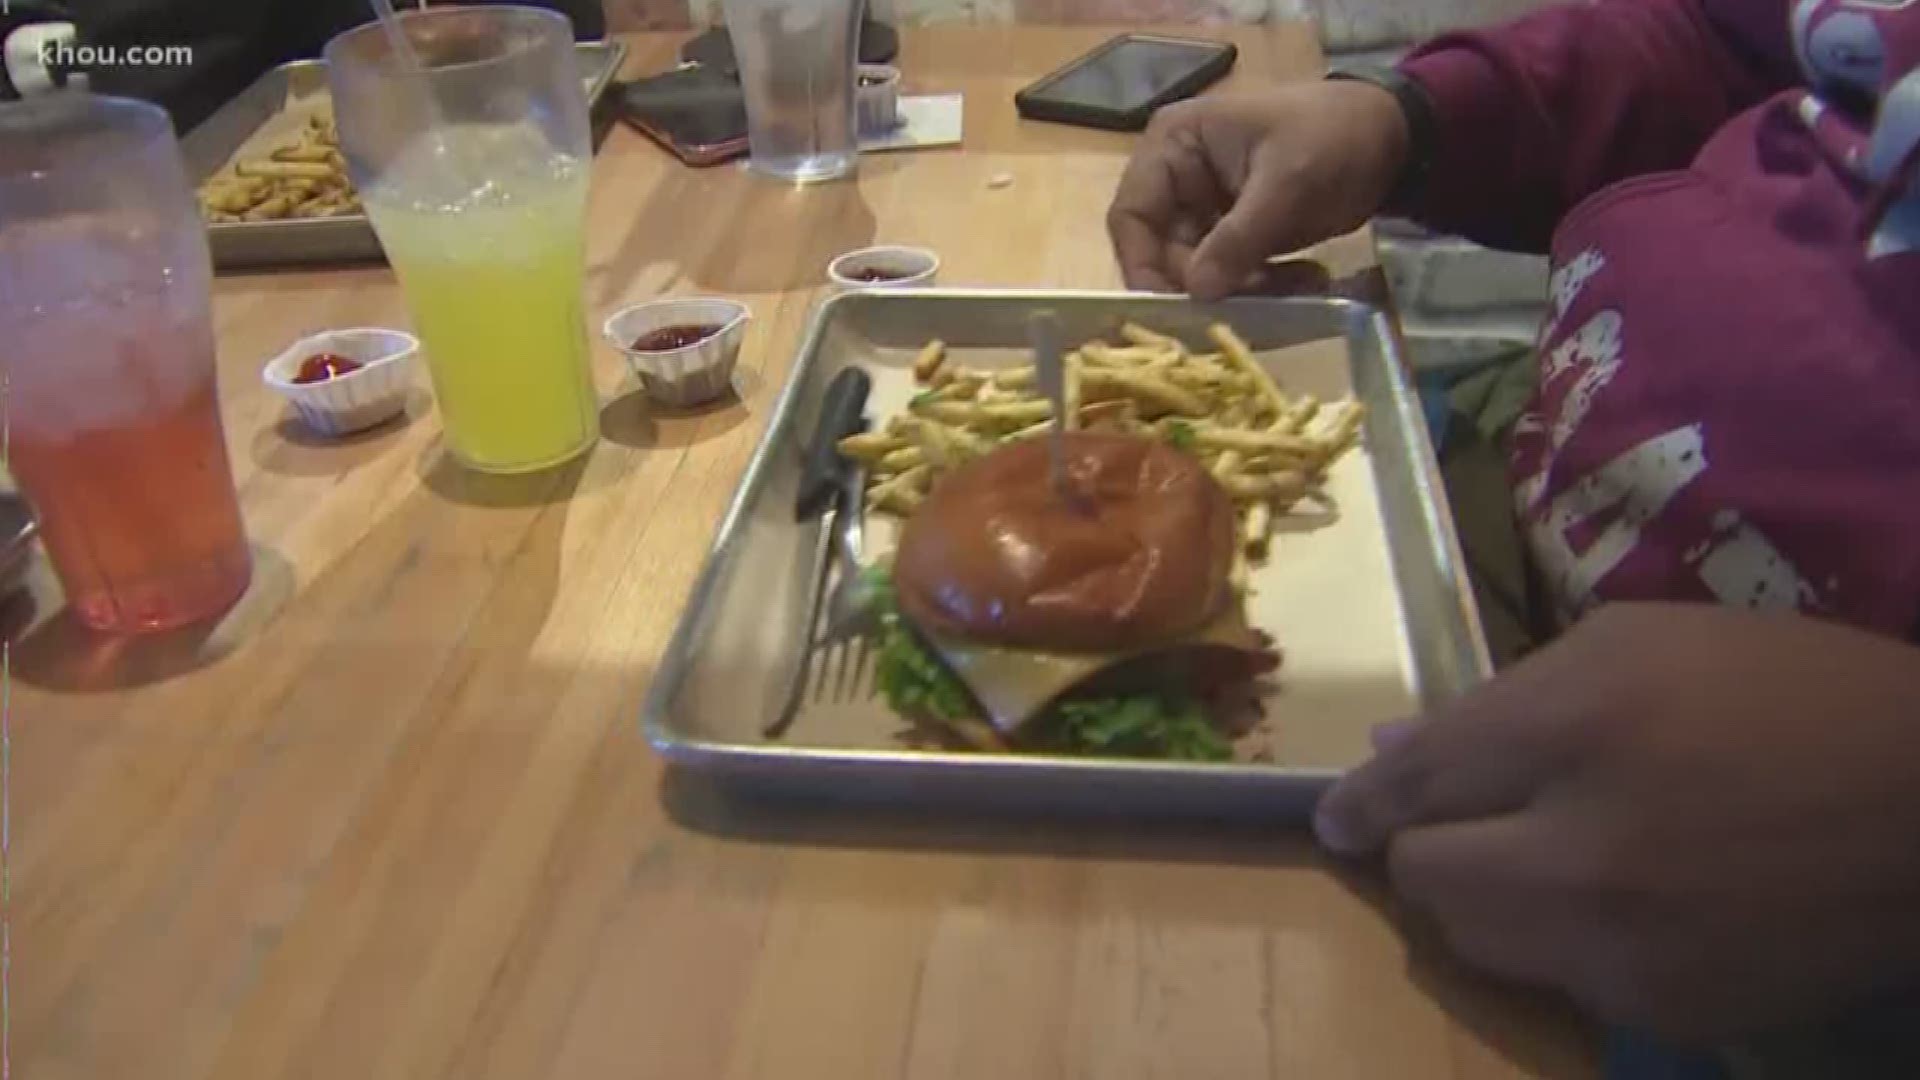 Hopdoddy is one of many businesses lending a hand to furloughed workers. When you show your federal ID, you get a free burger, fries and drink.